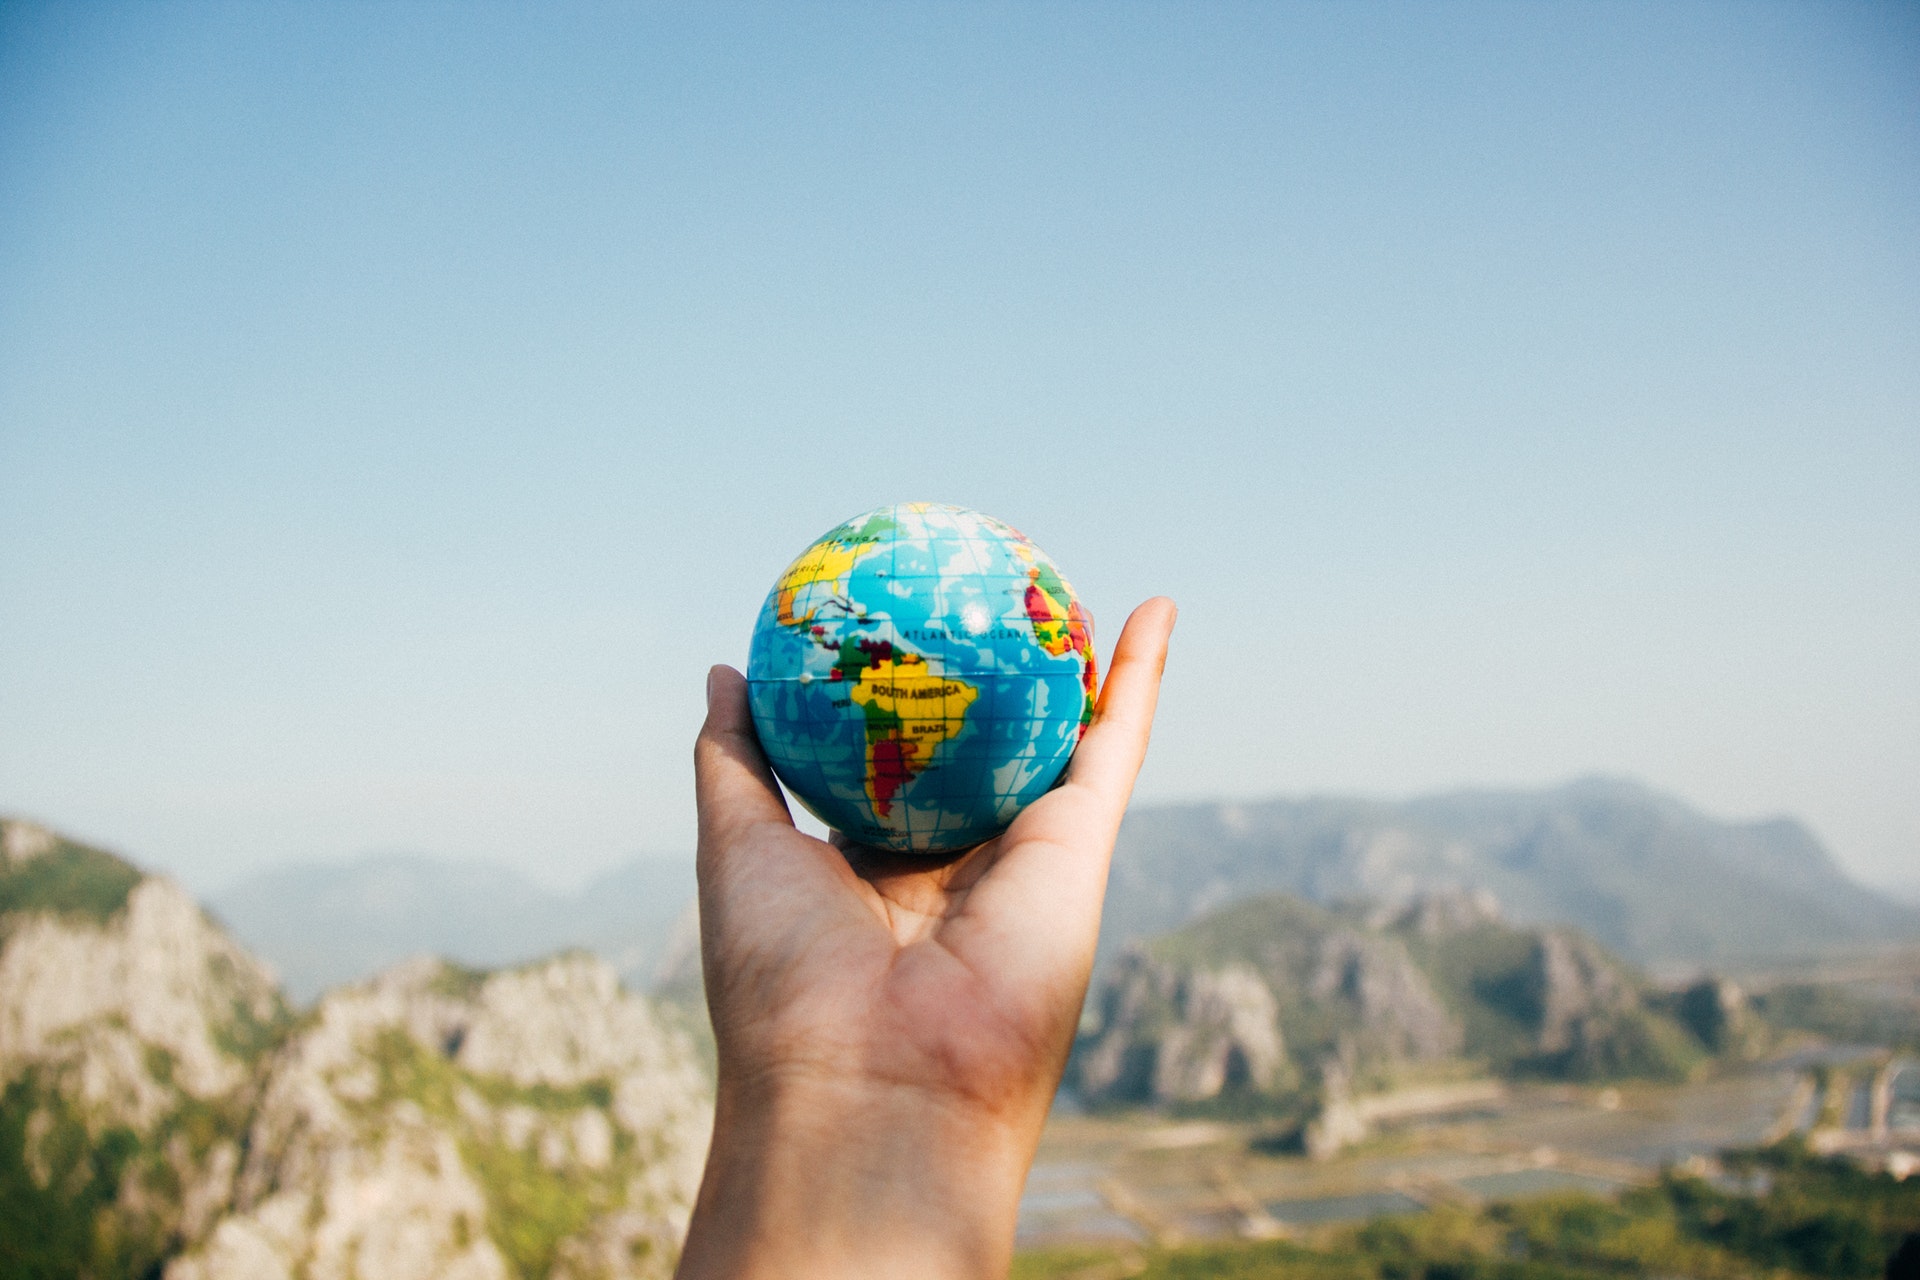 An open hand holding a palm sized world globe in the air against a dramatic mountainous backdrop.